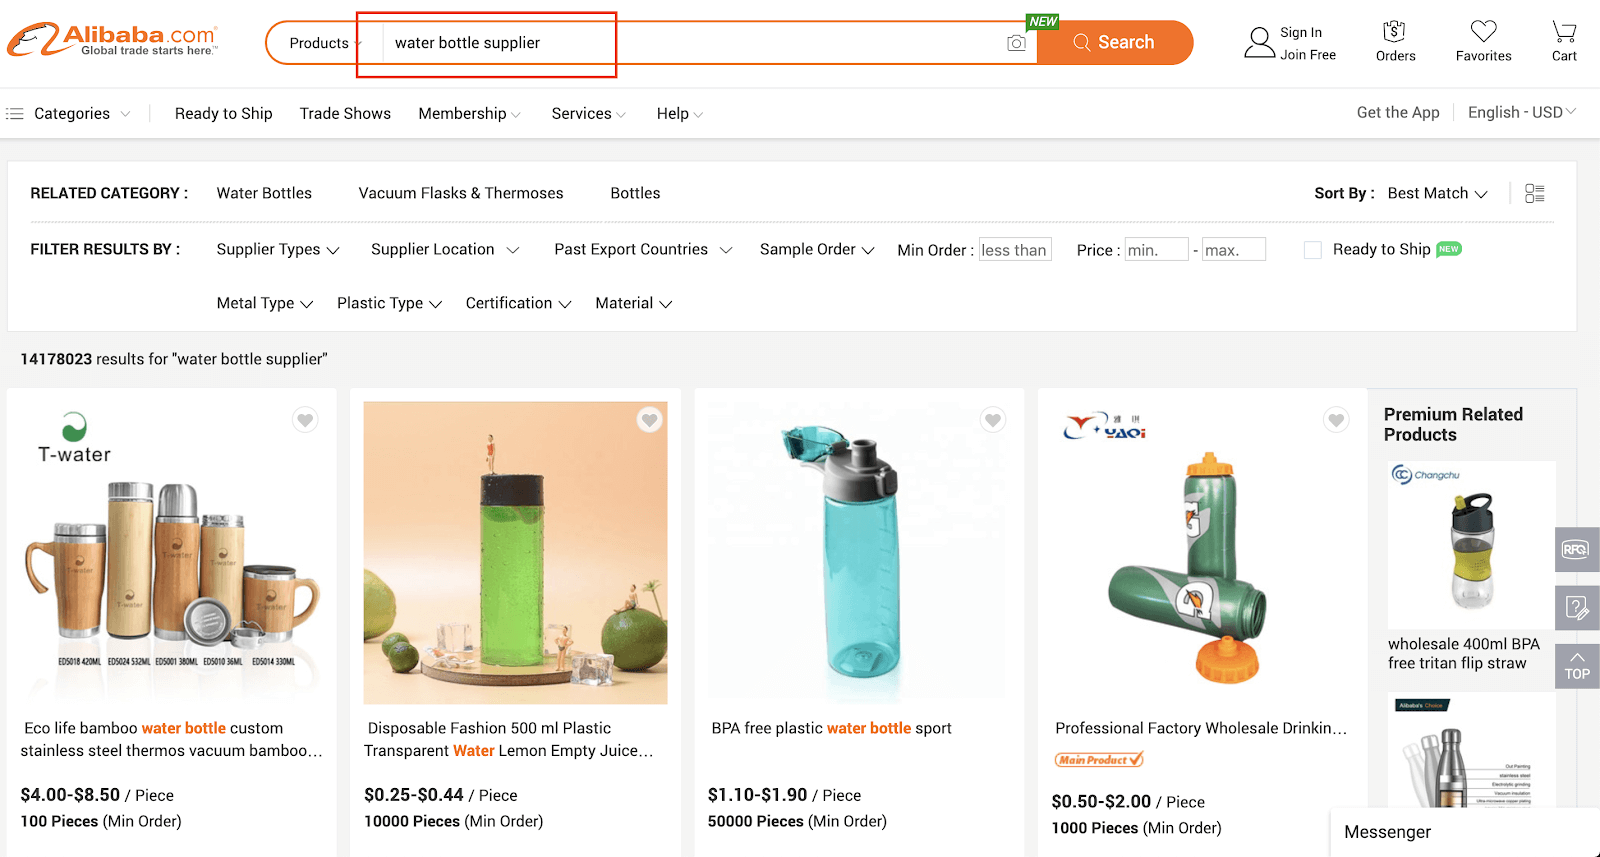 going search for water bottle suppliers on Alibaba search engine